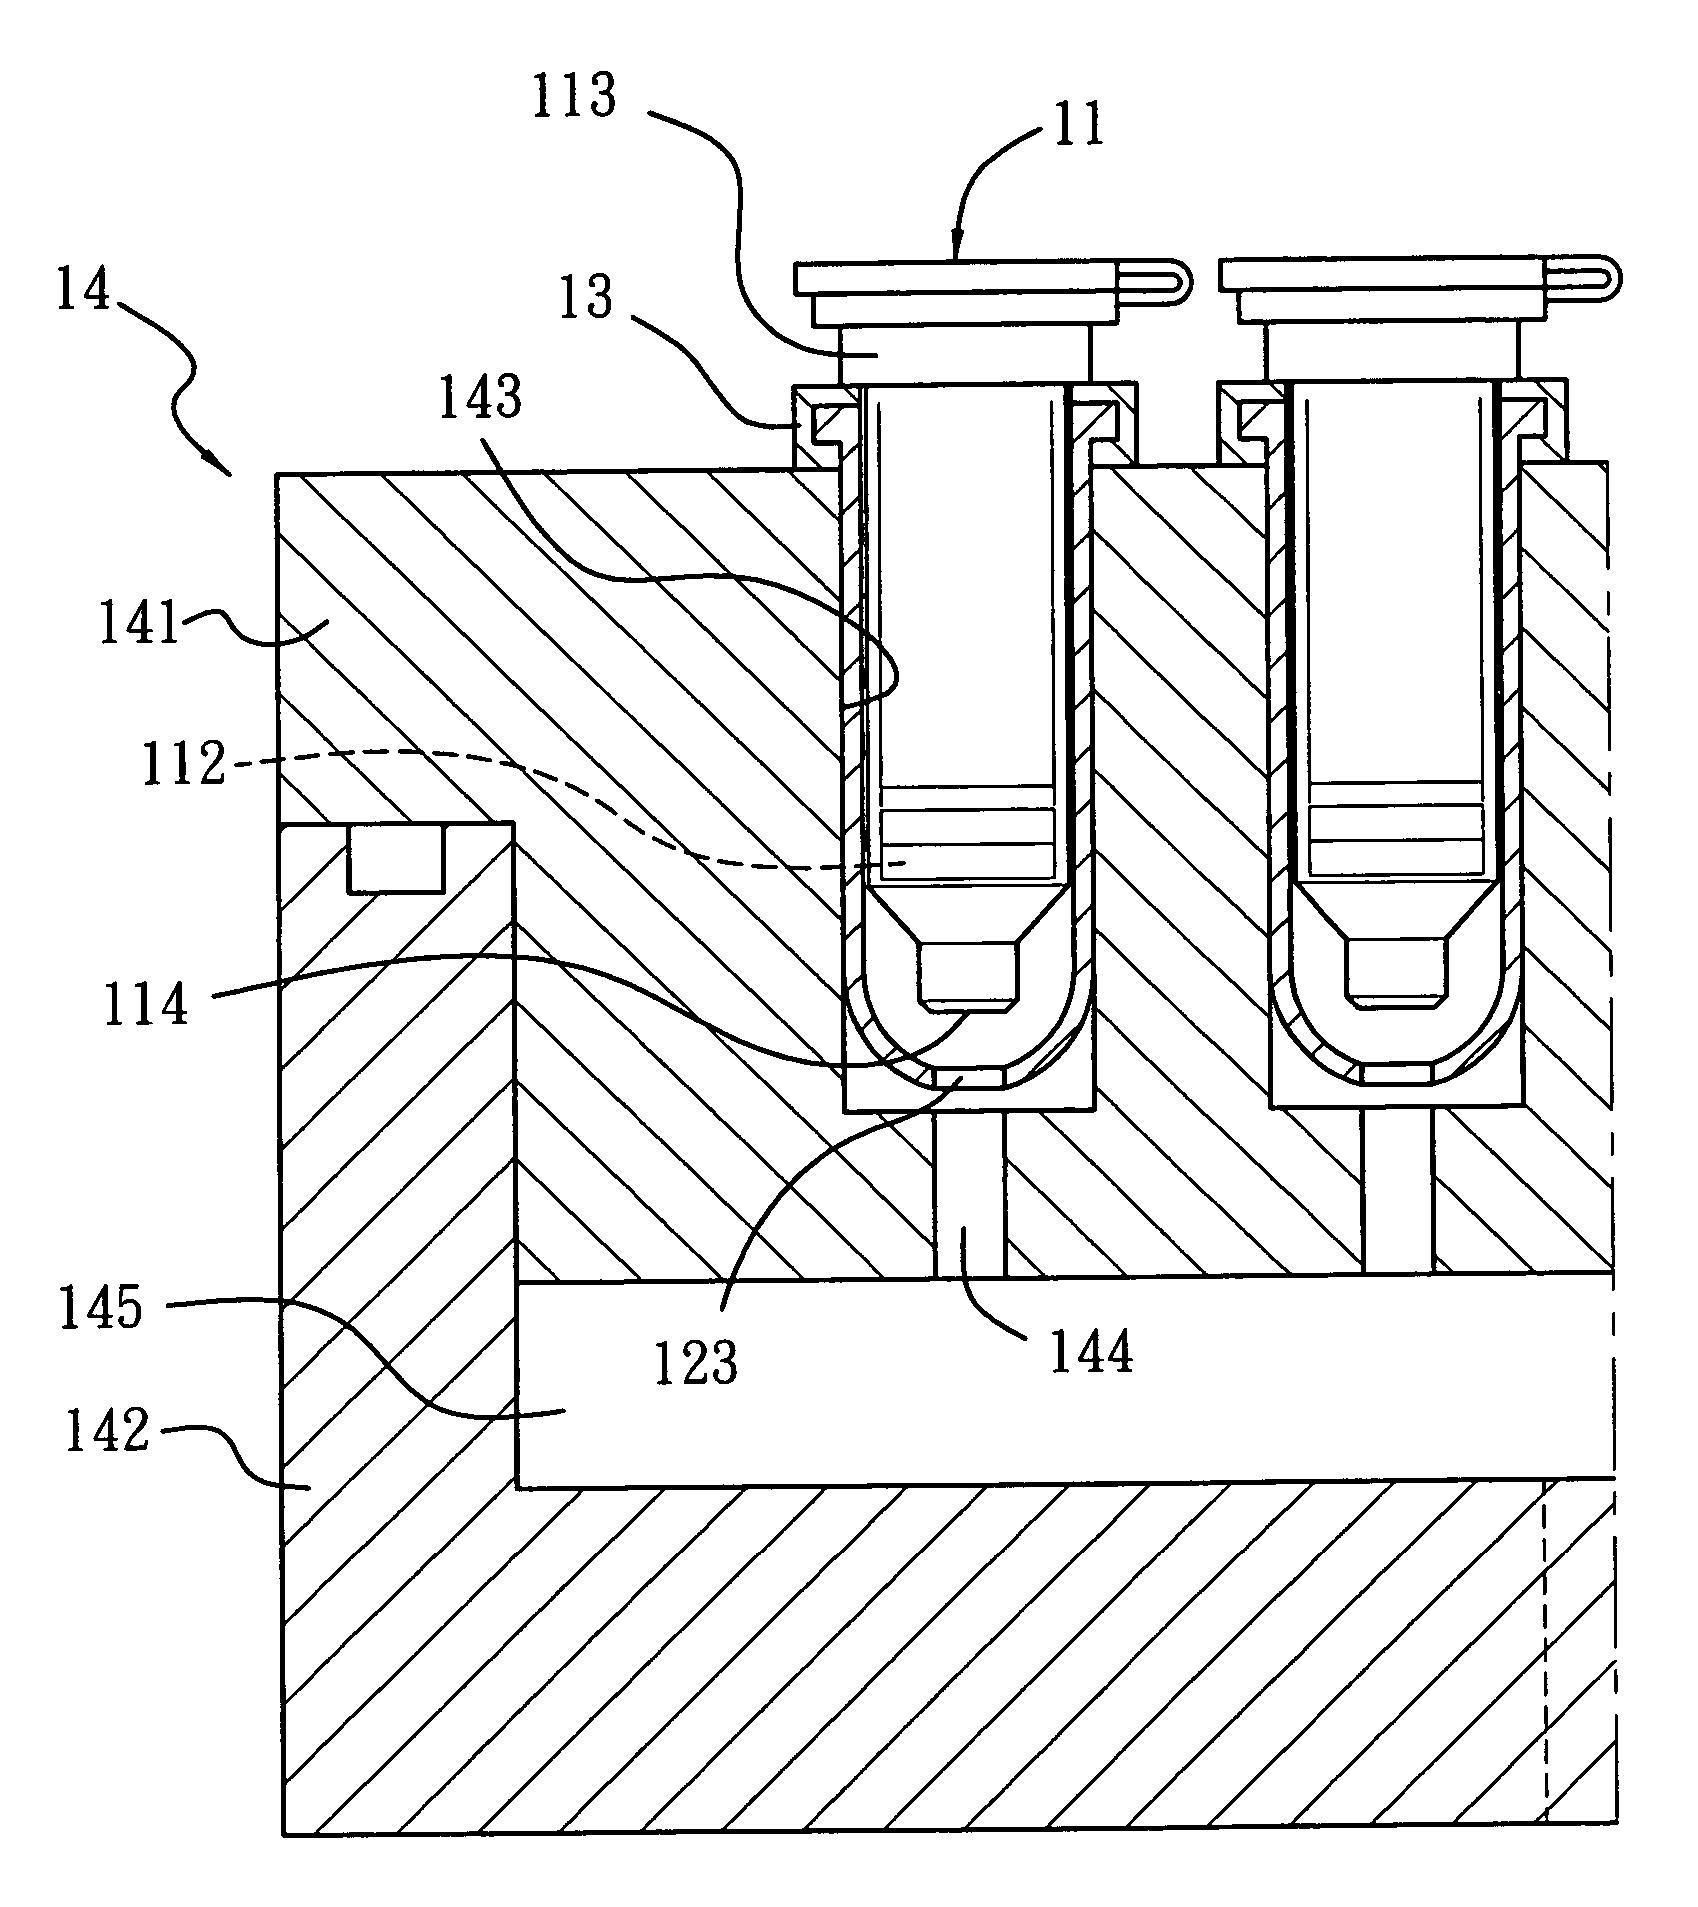 Apparatus for processing biological sample